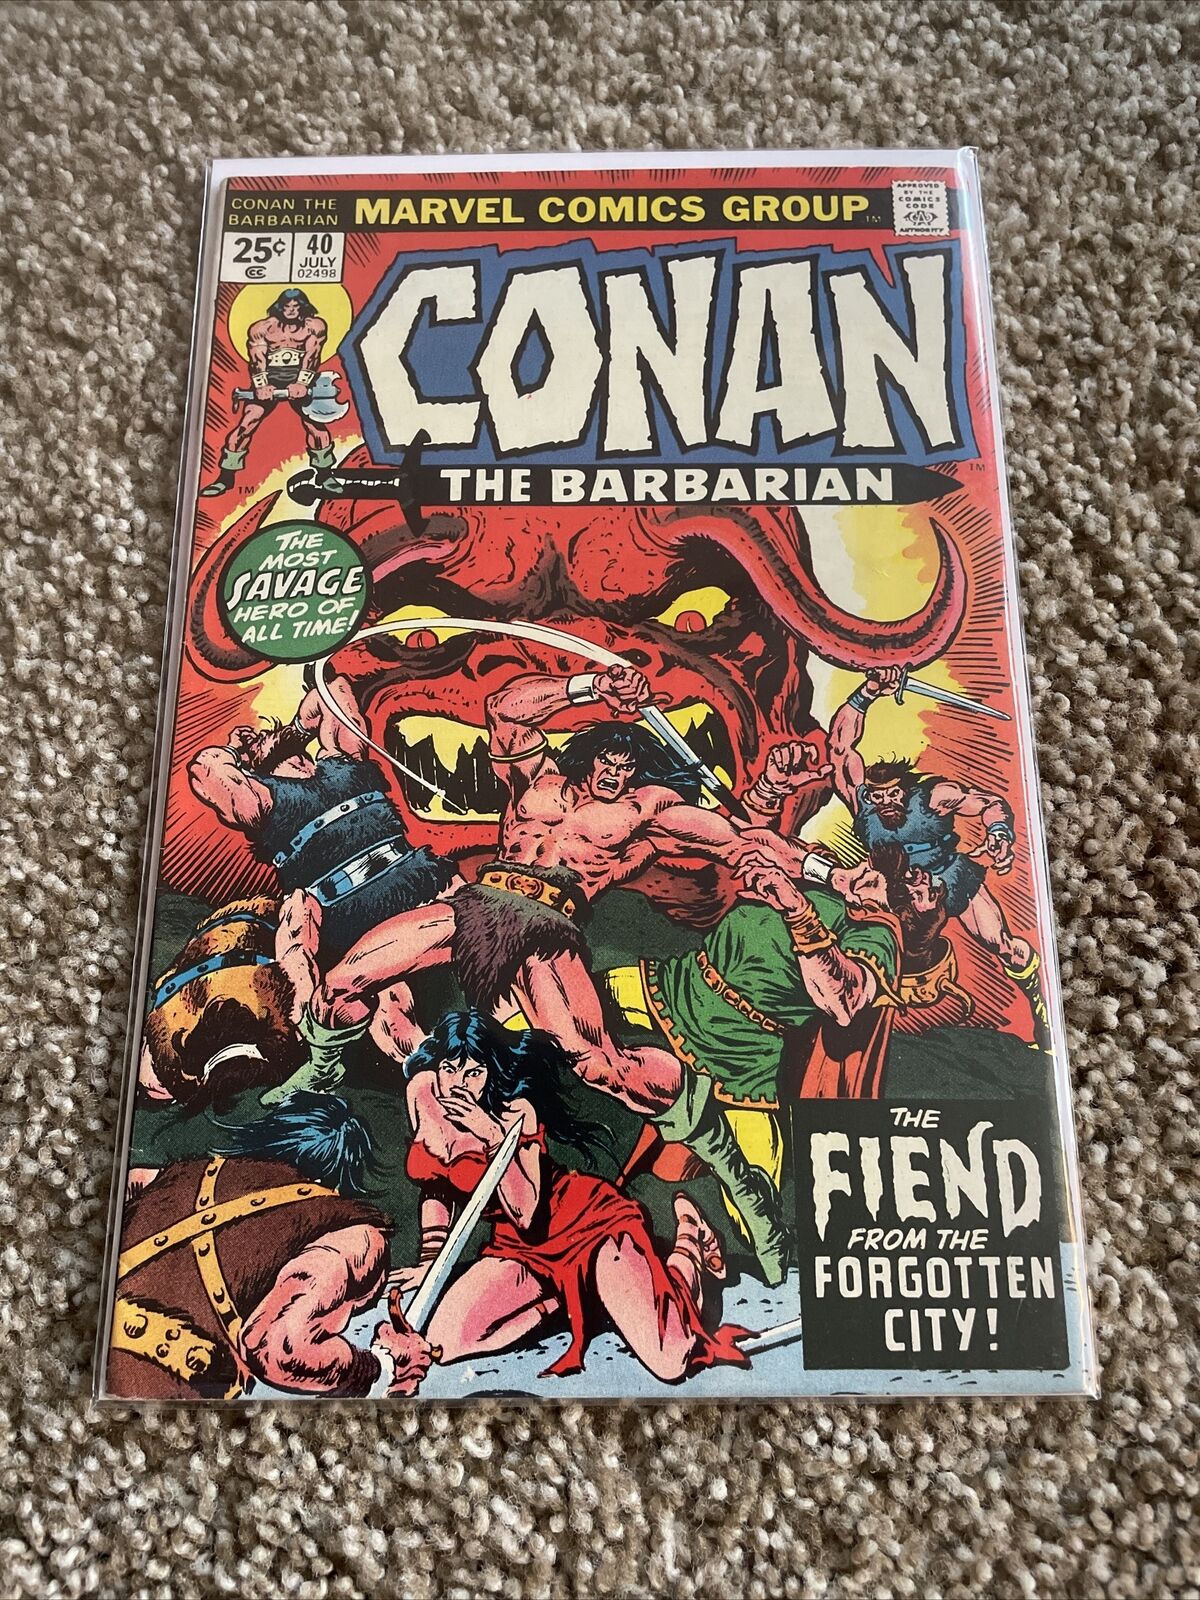 CONAN THE BARBARIAN #40 VG/FN 1974 BRONZE AGE MARVEL FIEND FROM FORGOTTEN CITY